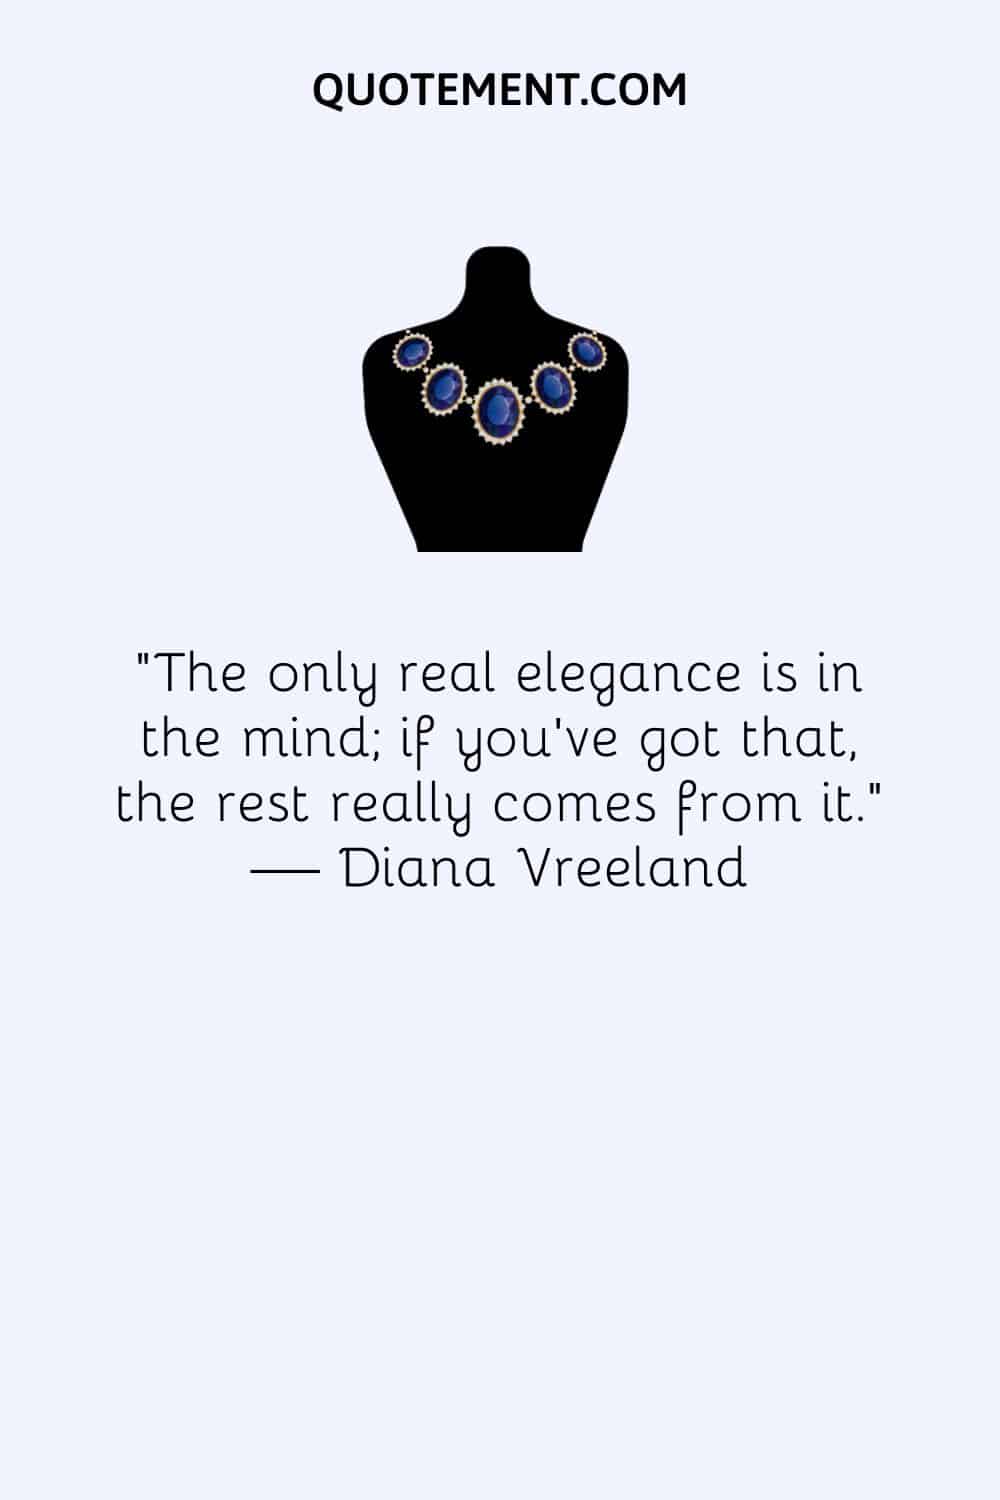 The only real elegance is in the mind; if you’ve got that, the rest really comes from it